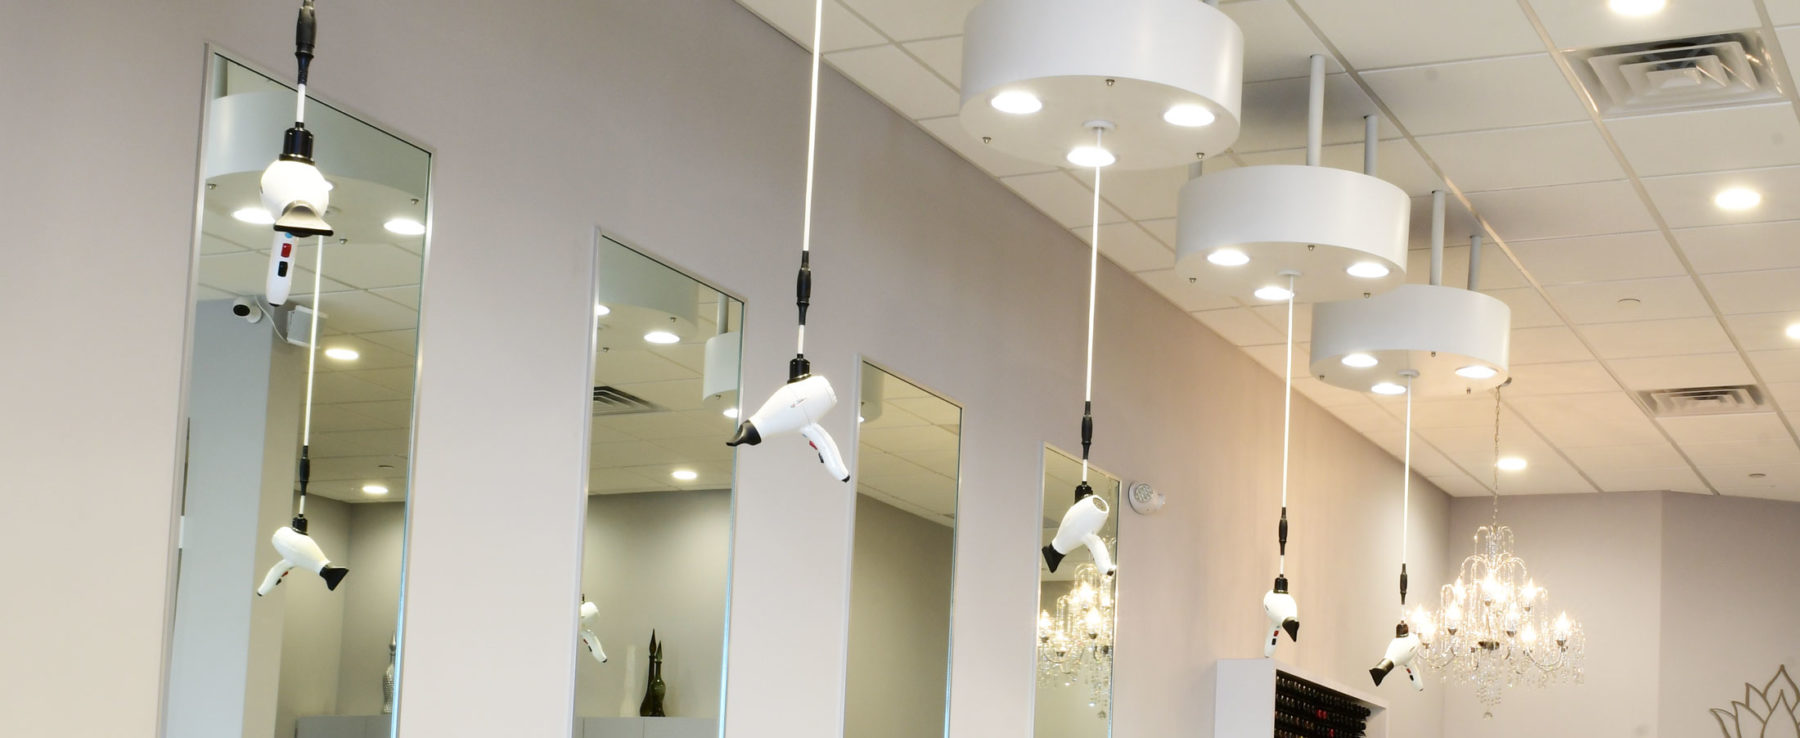 Vero Salon & Spa Embracing Freestyle Systems' Weightless Hair Drying and Premium Salon Lighting.